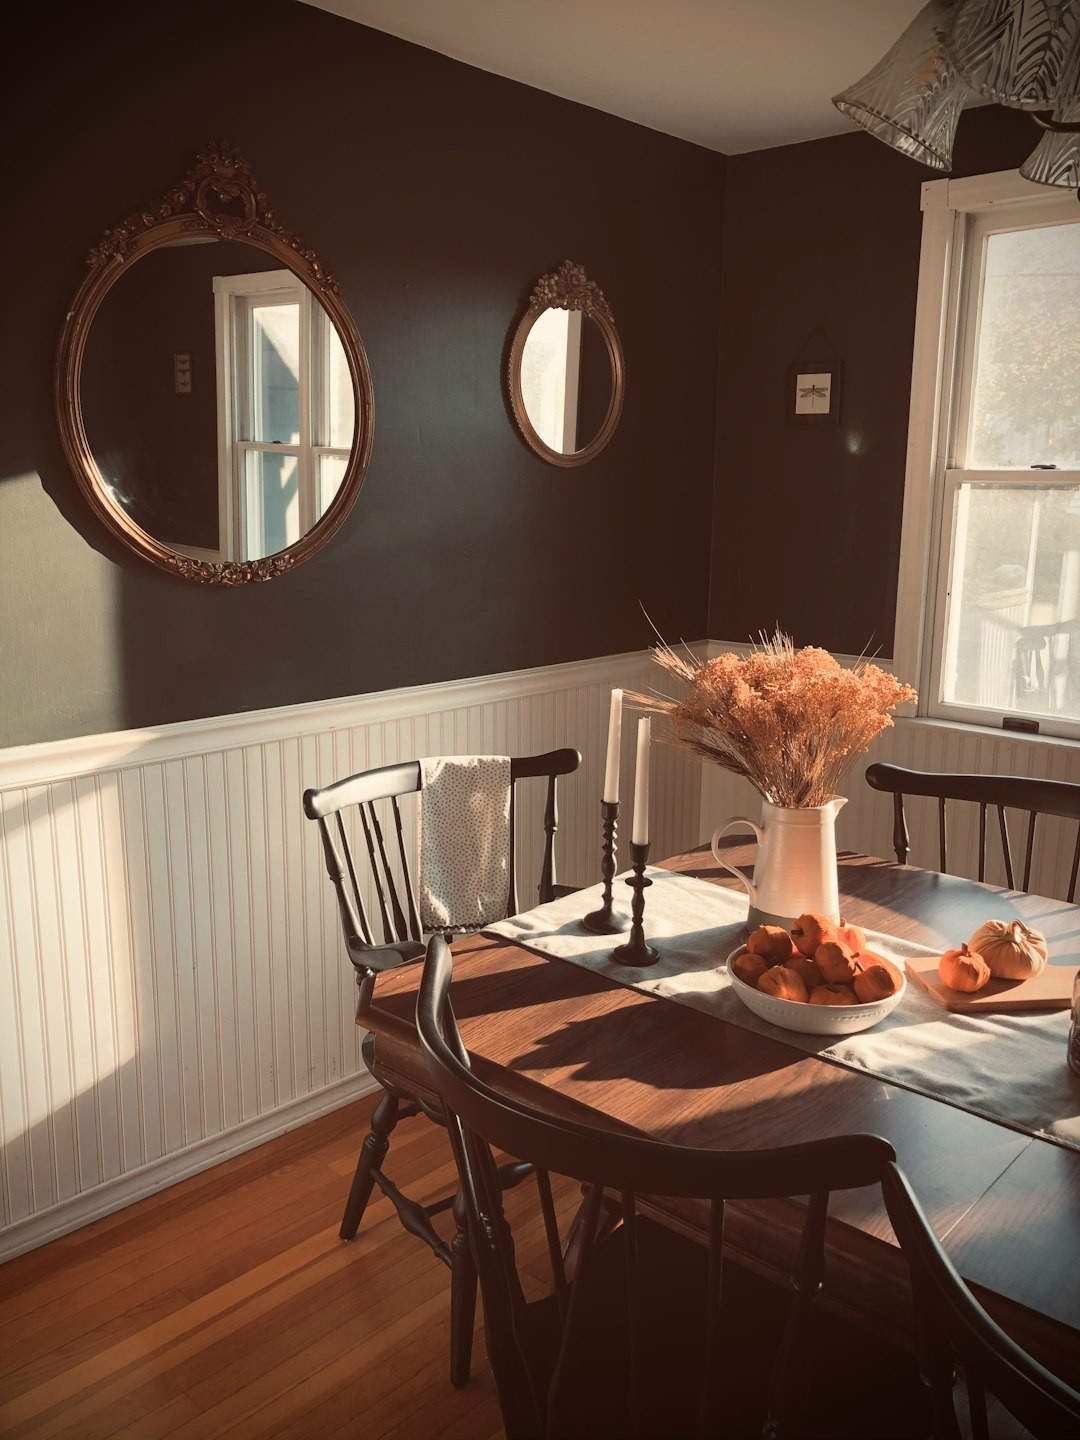 Antique dark brown wooden table surrounded by vintage black chairs in a dark green walled dining room. Ornate vintage gold mirrors hang on the walls. Faux pumpkins and dried foliage decorate the tabletop along with two black candlestick holders.